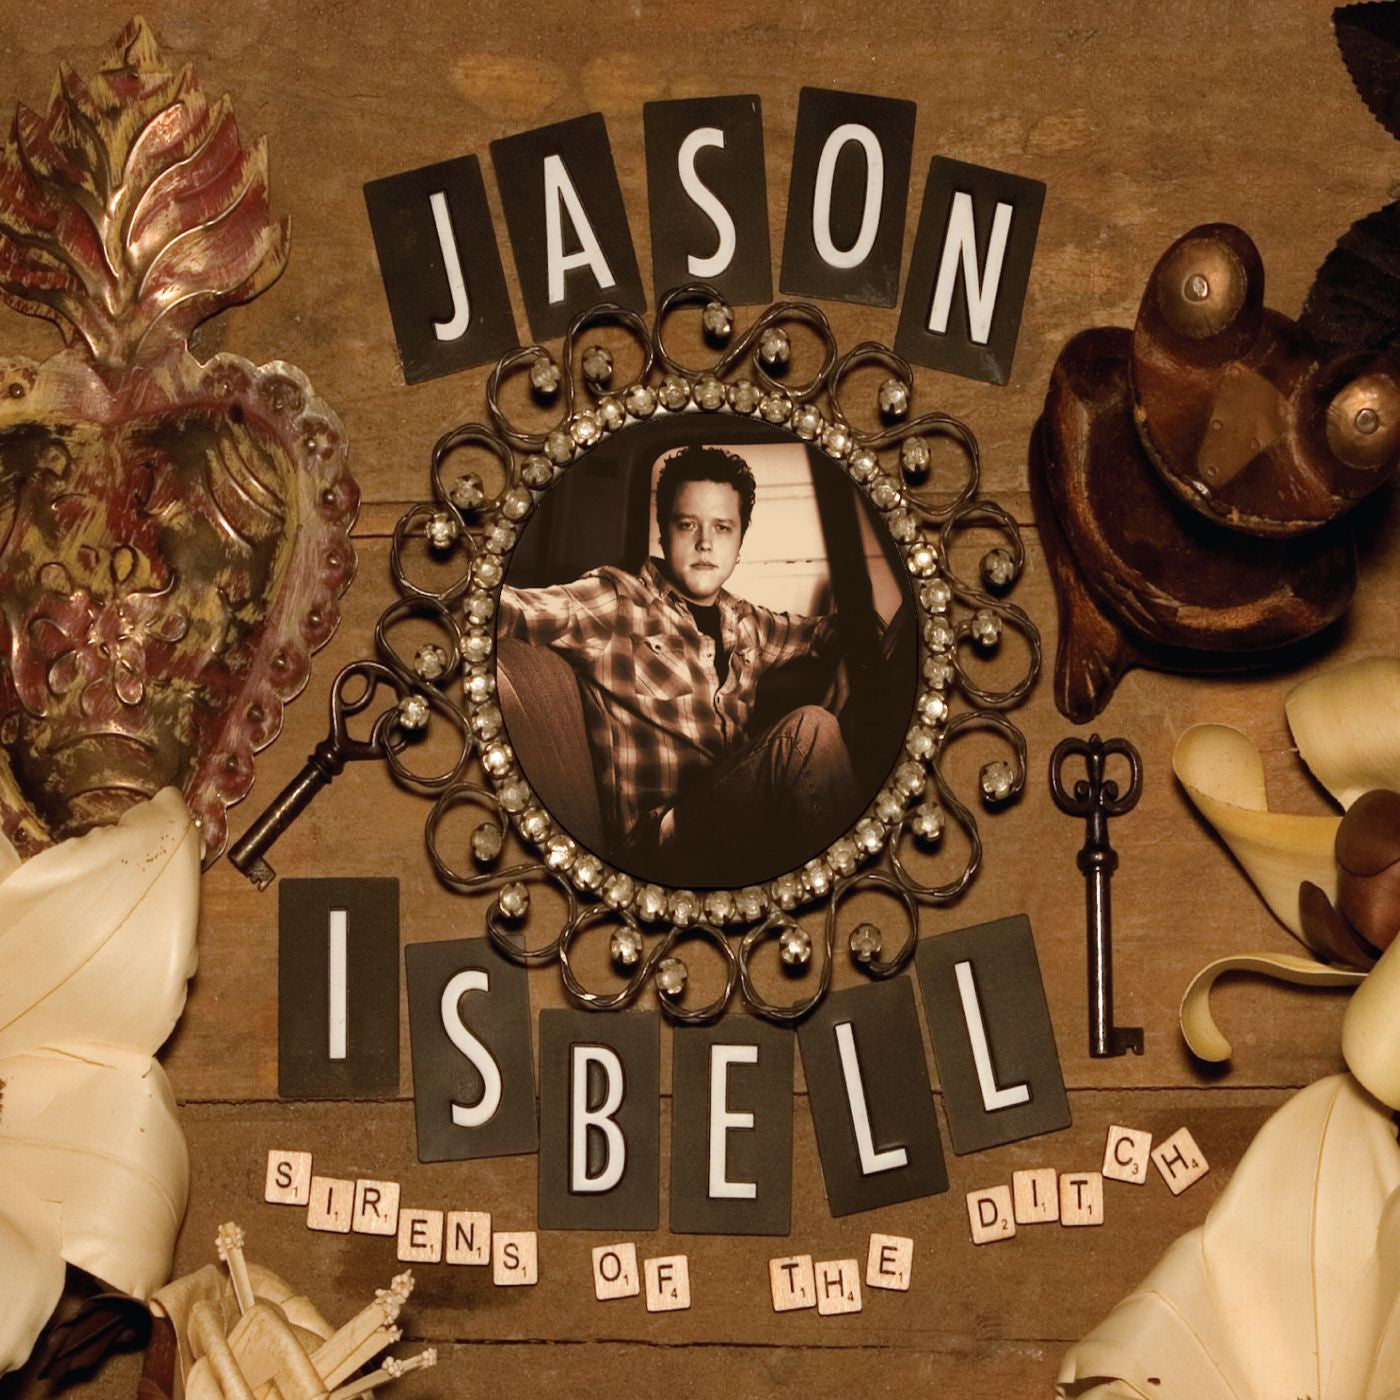 JASON ISBELL 'SIRENS OF THE DITCH' 2LP (Deluxe Edition, "Hurricanes and Hand Grenades" Vinyl)